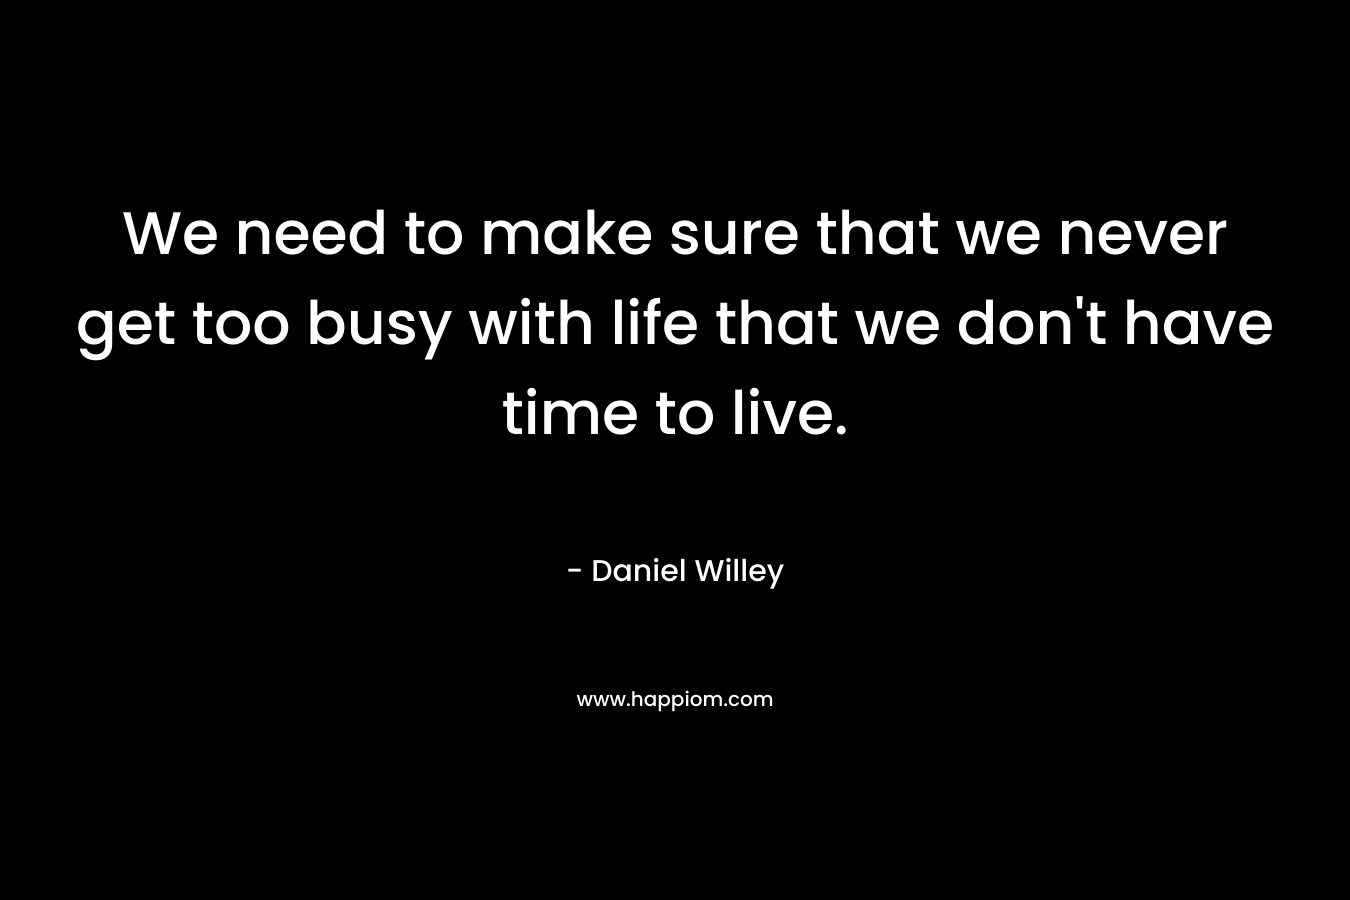 We need to make sure that we never get too busy with life that we don't have time to live.